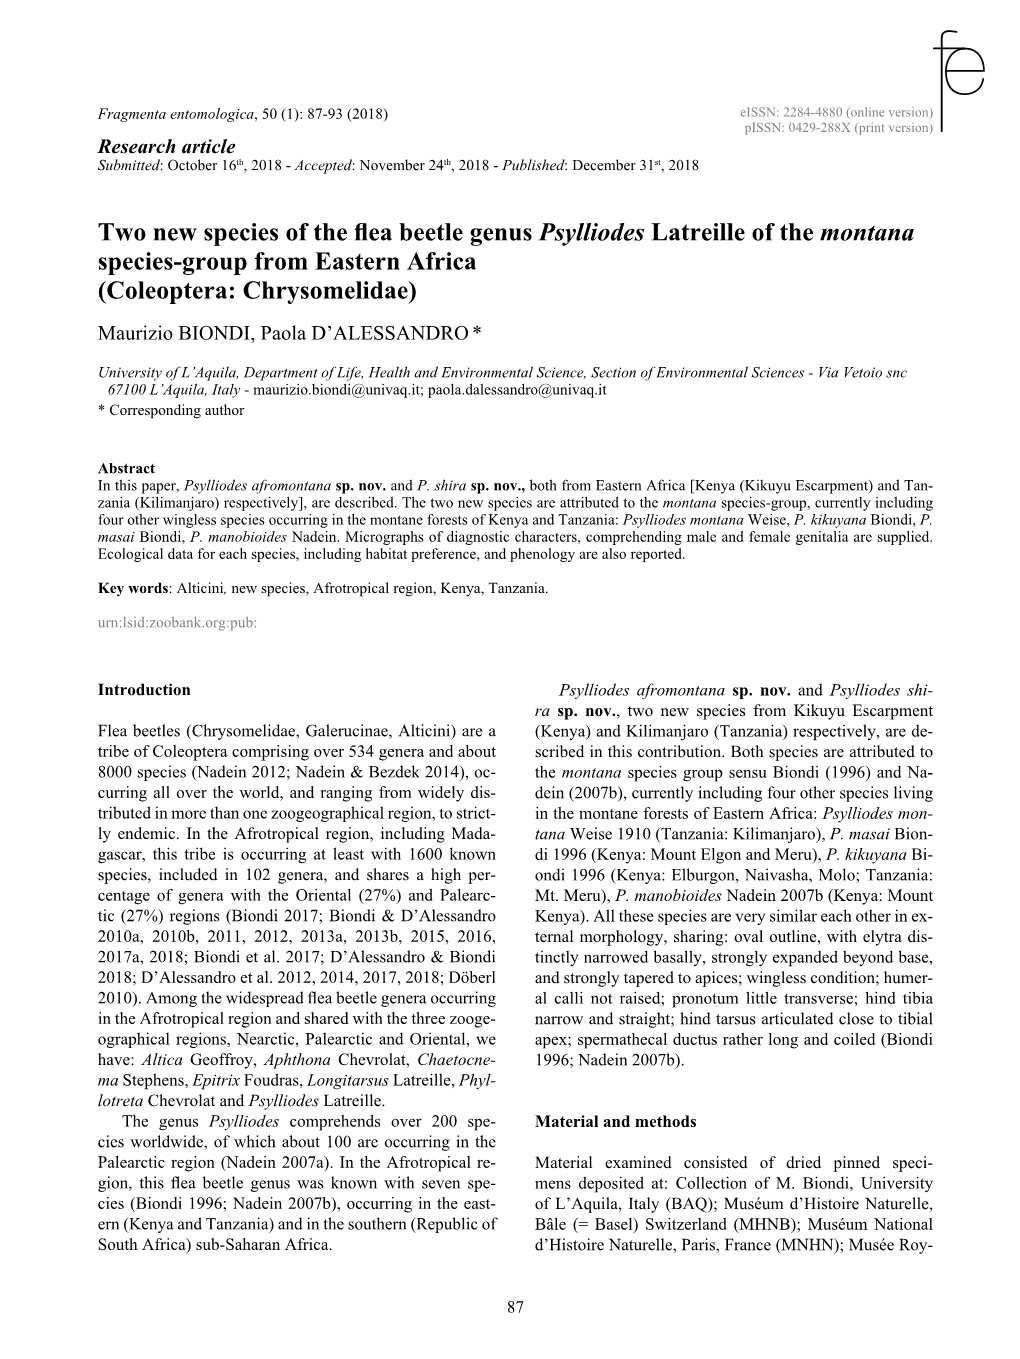 Two New Species of the Flea Beetle Genus Psylliodes Latreille of The